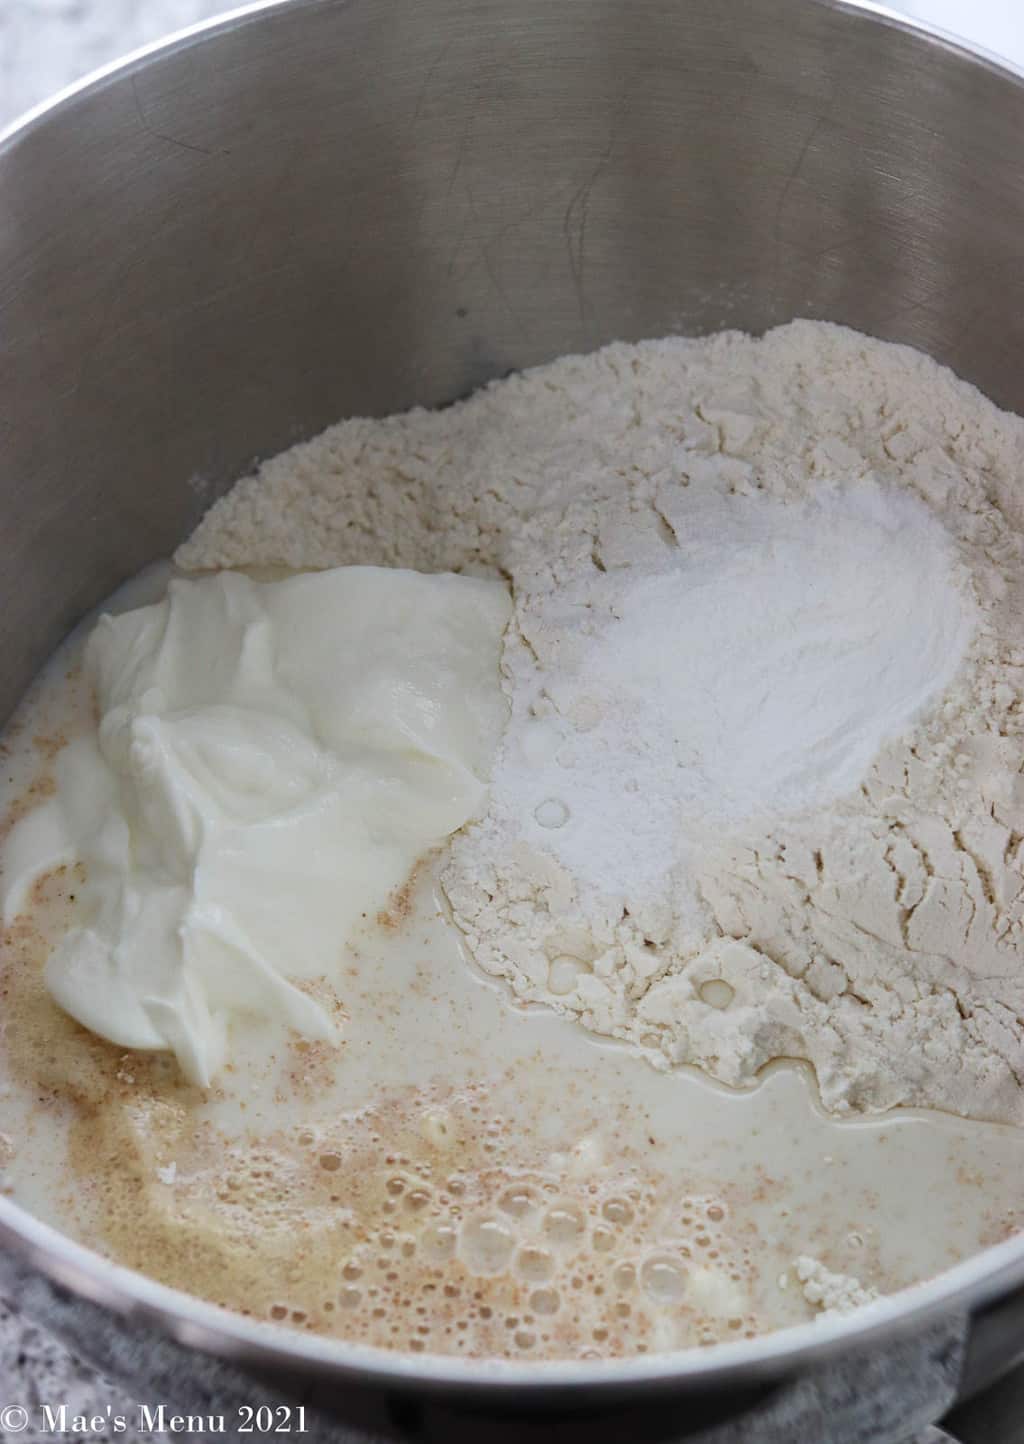 Adding flour, greek yogurt, milk, and other ingredients to the mixing bowl